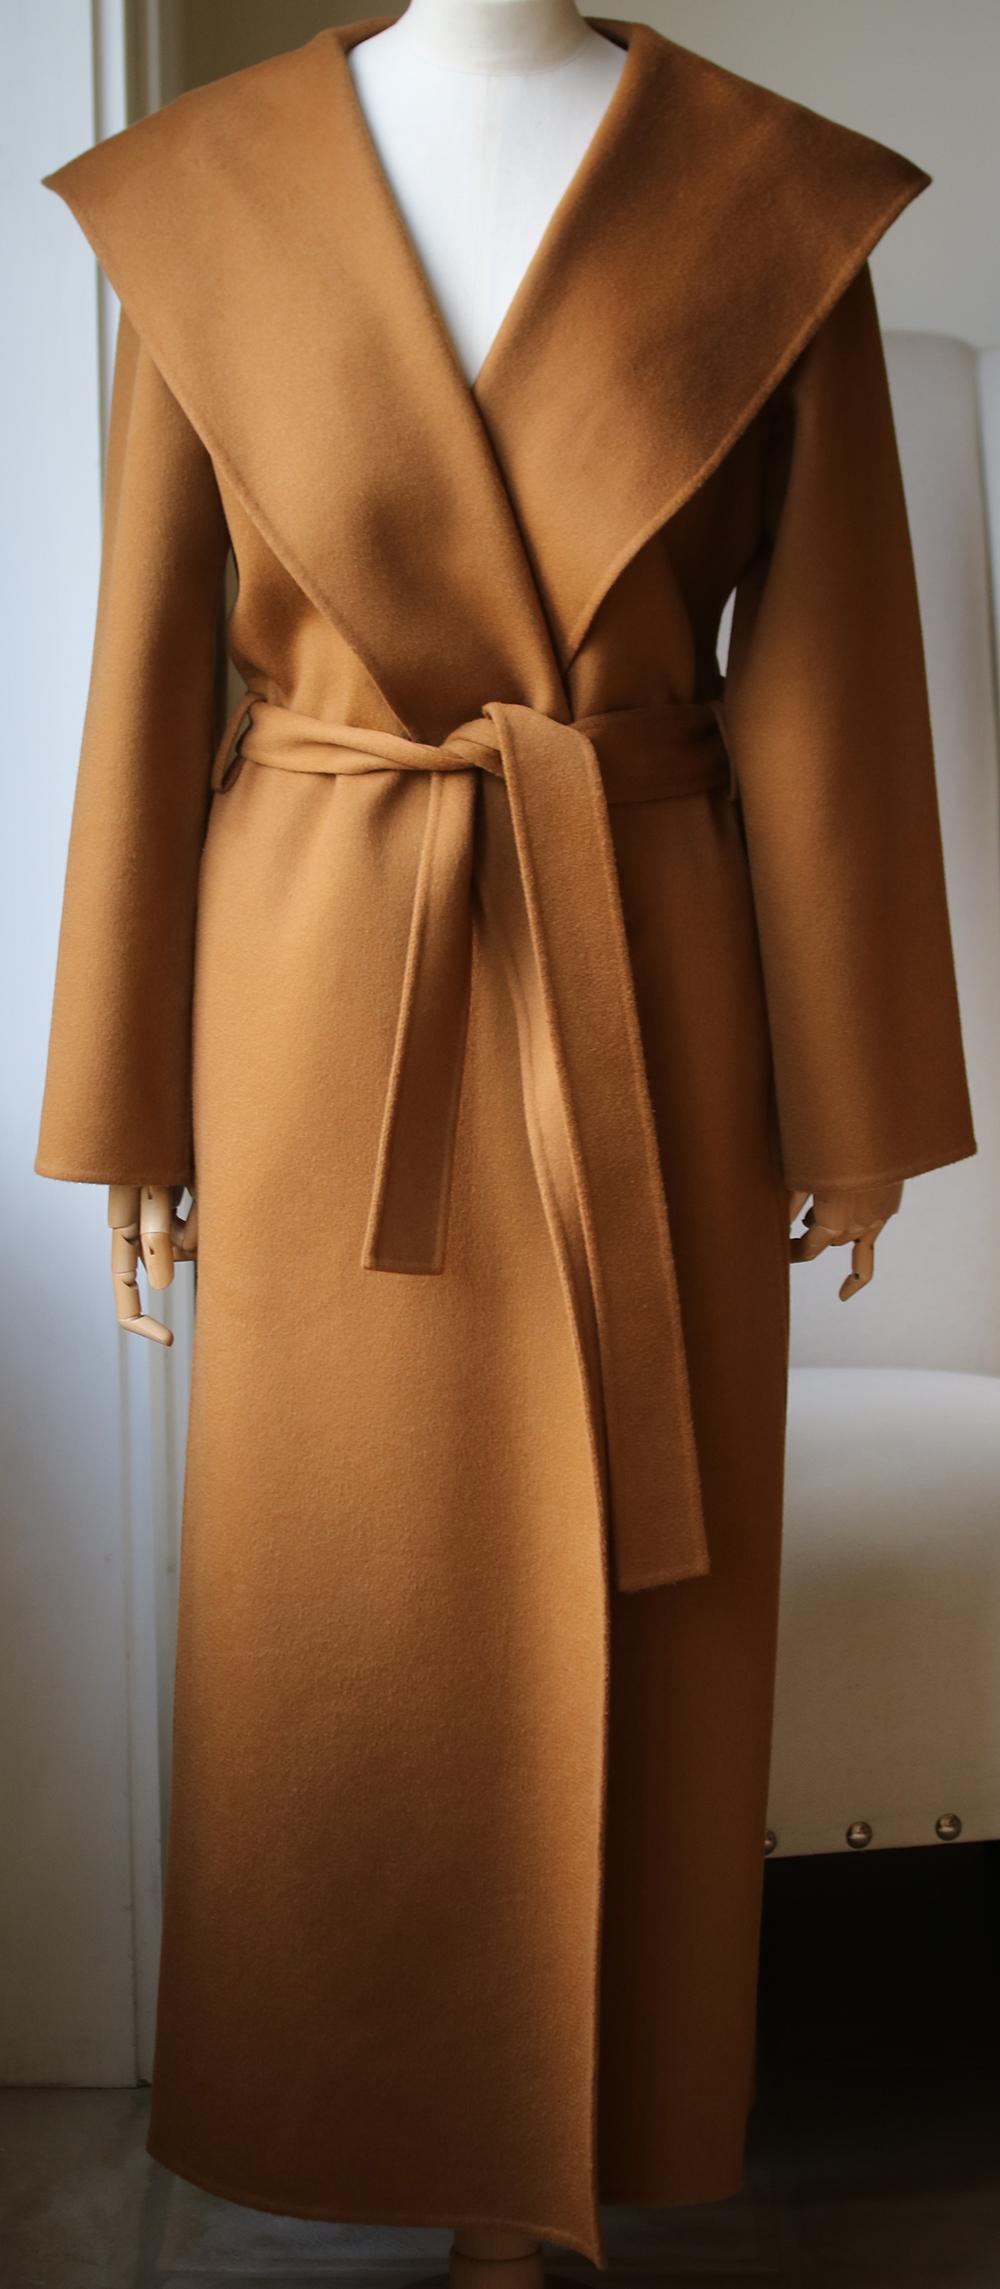 The Row's collections are coveted for their luxurious quality and timeless elegance. This 'Muna' coat is perfectly undone - it's cut from soft wool for a relaxed, enveloping drape and ties with a detachable belt. Finished with a hood, it's lined